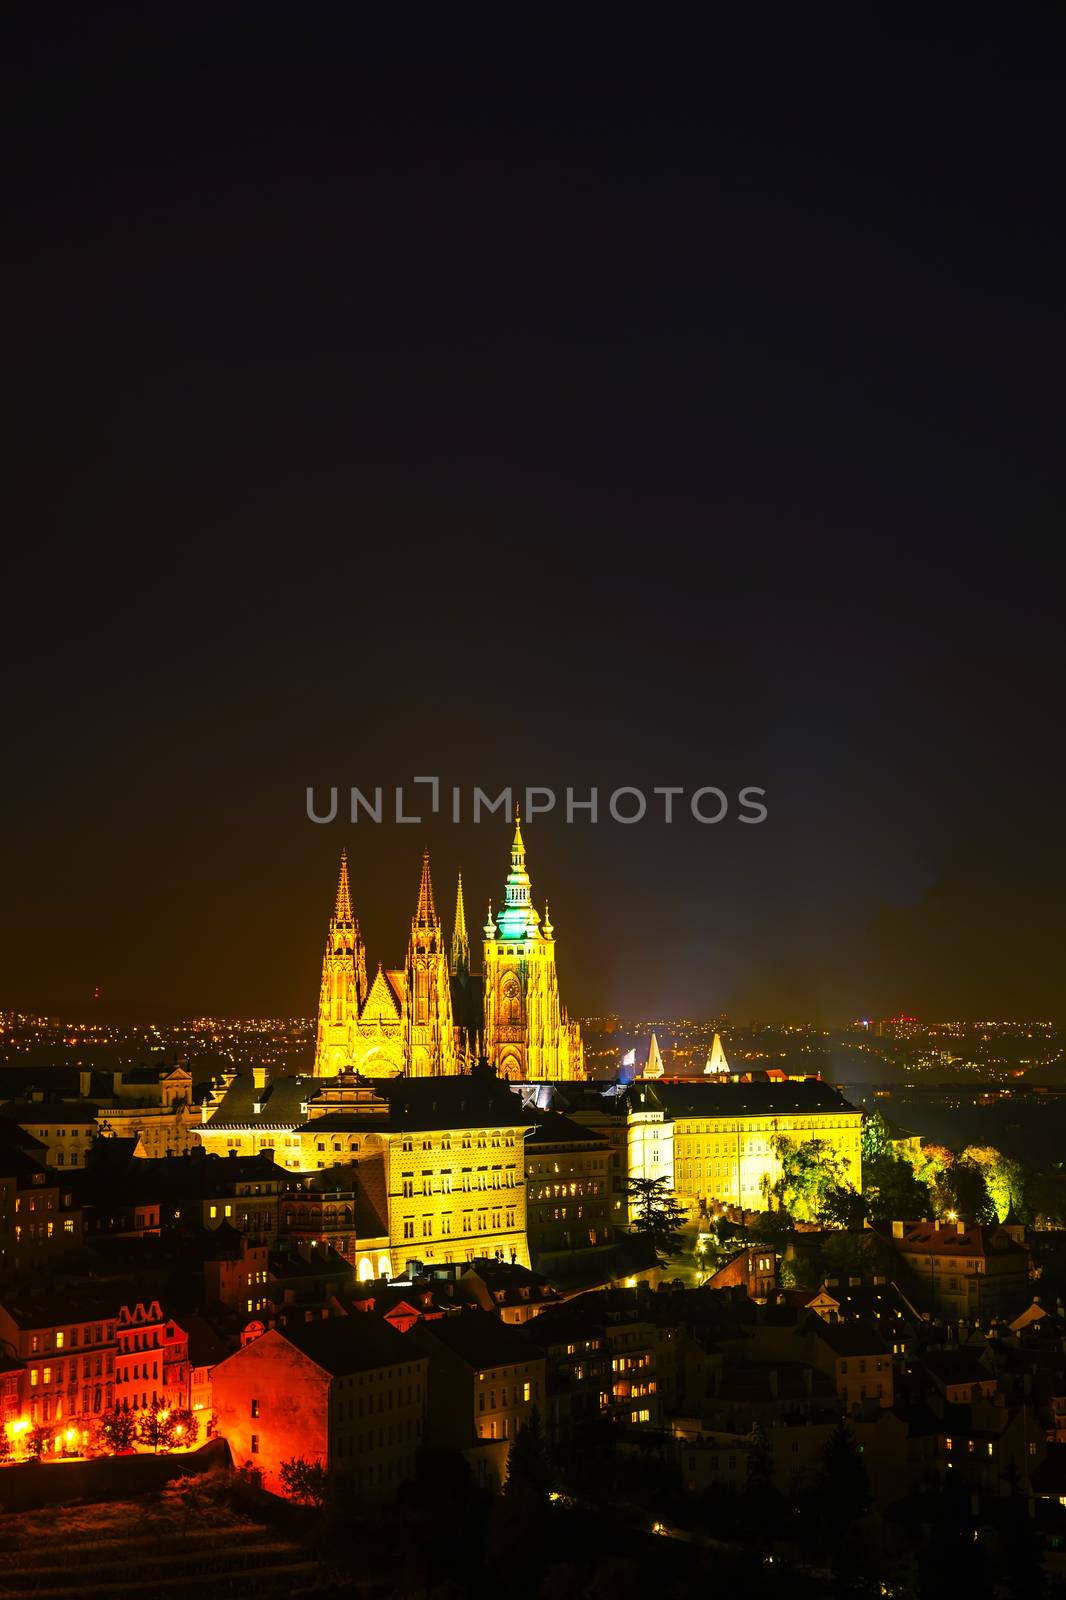 The Prague castle by AndreyKr